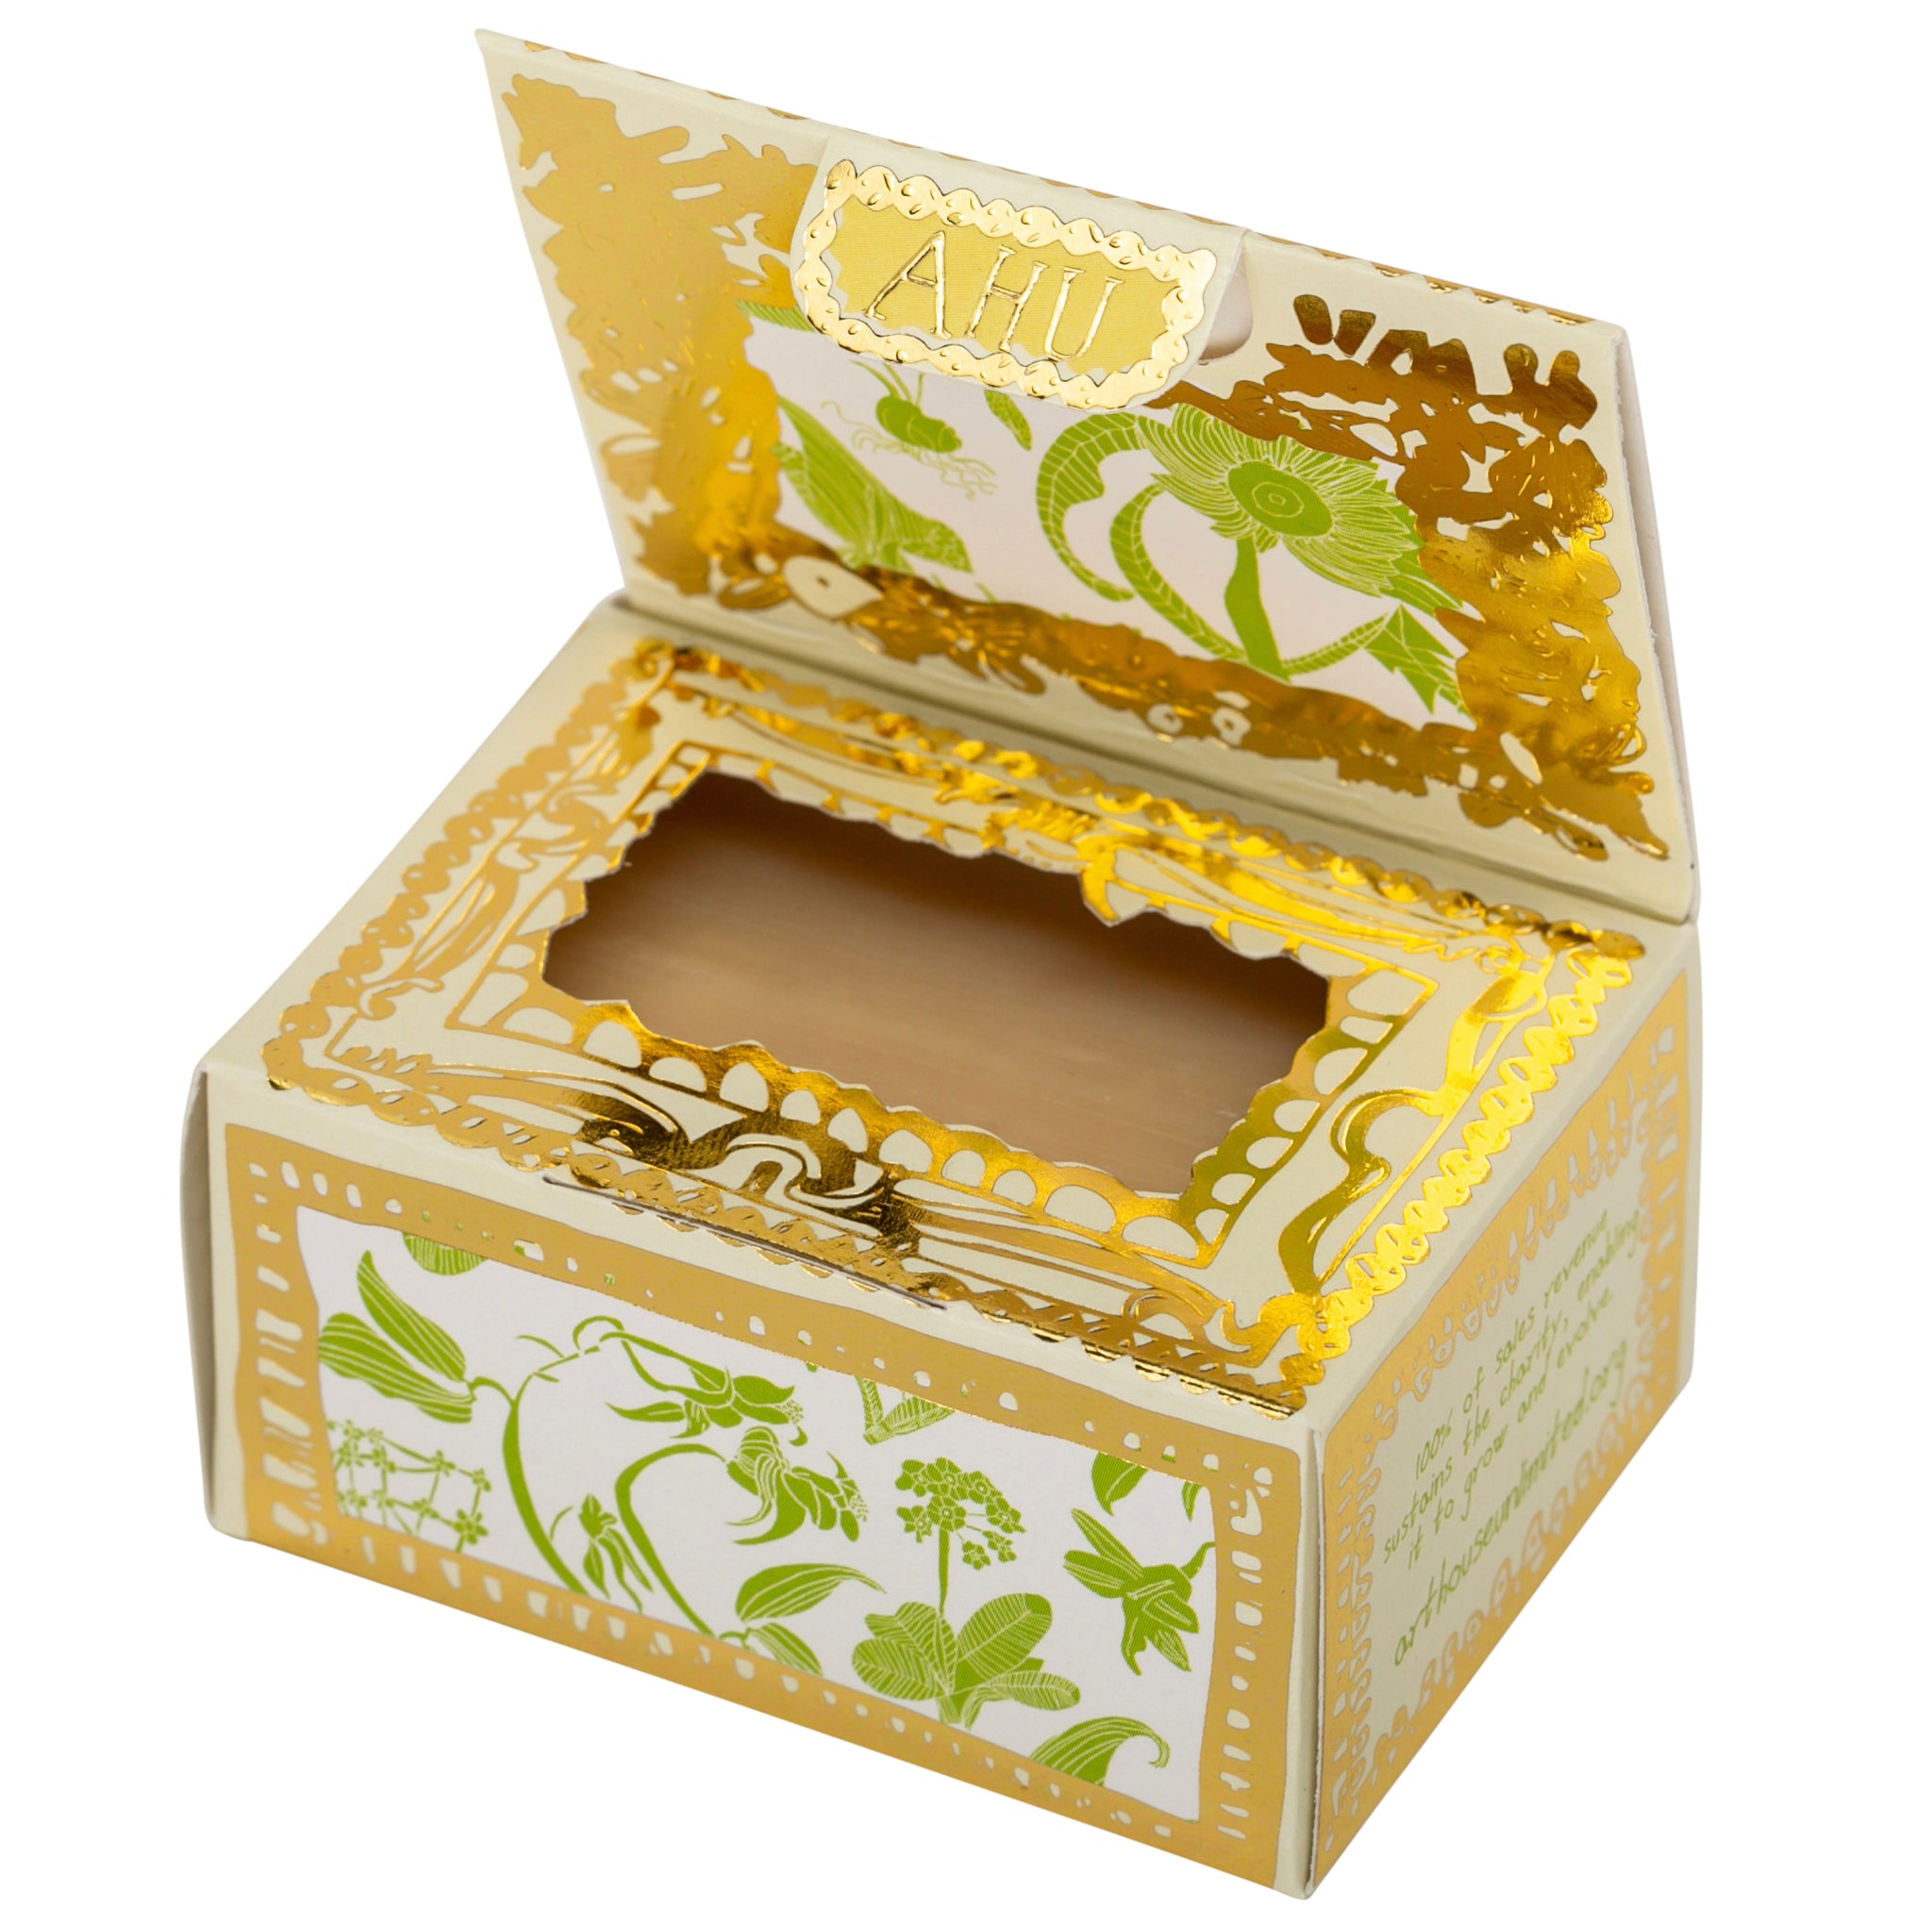 Open box of Laura's Floral, Triple Milled Organic Soap Slab